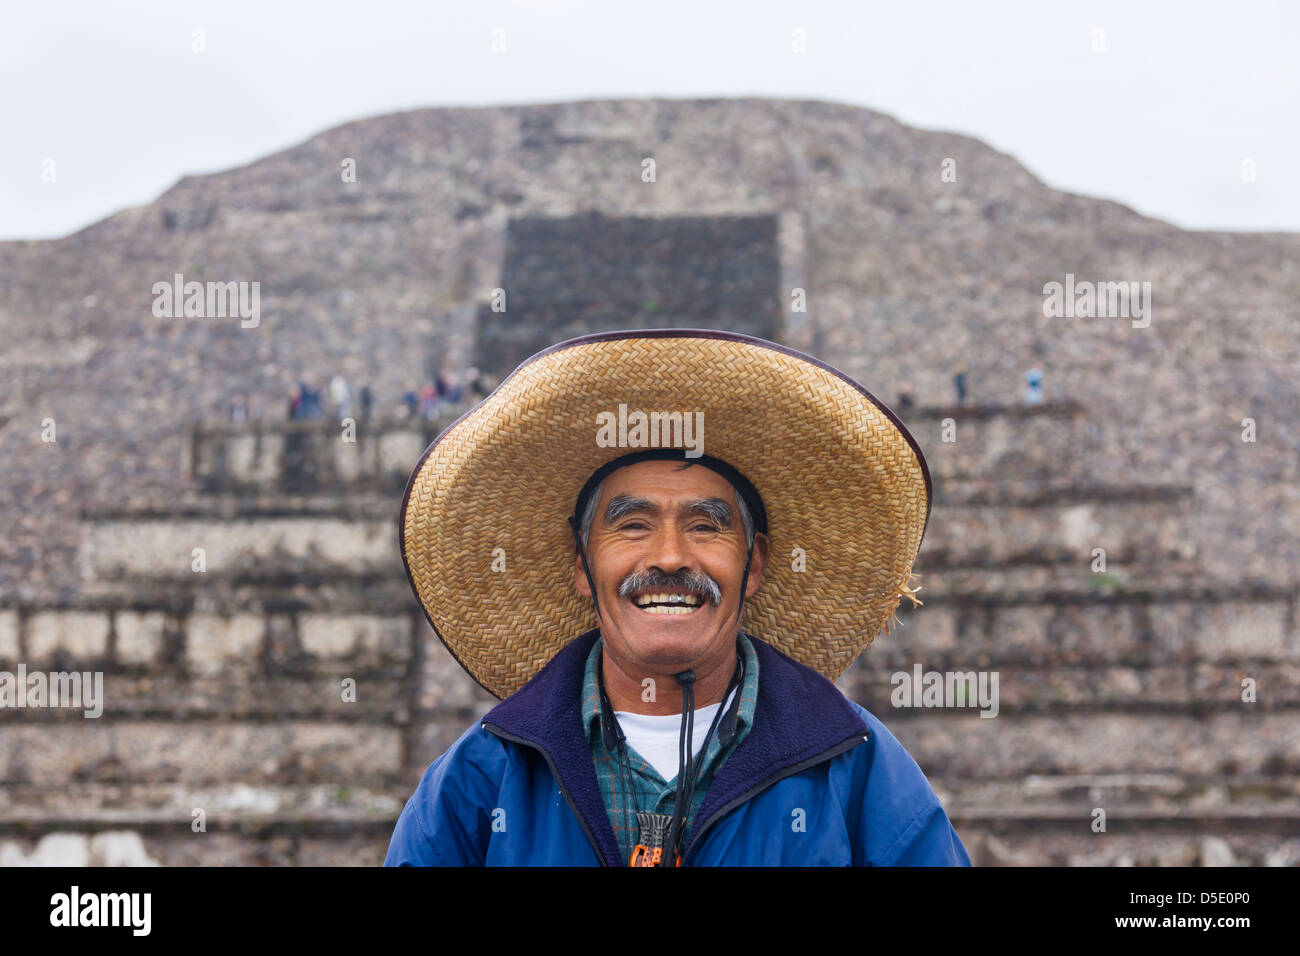 https://c8.alamy.com/comp/D5E0P0/mexican-man-wearing-straw-hat-with-pyramid-of-the-sun-teotihuacan-D5E0P0.jpg